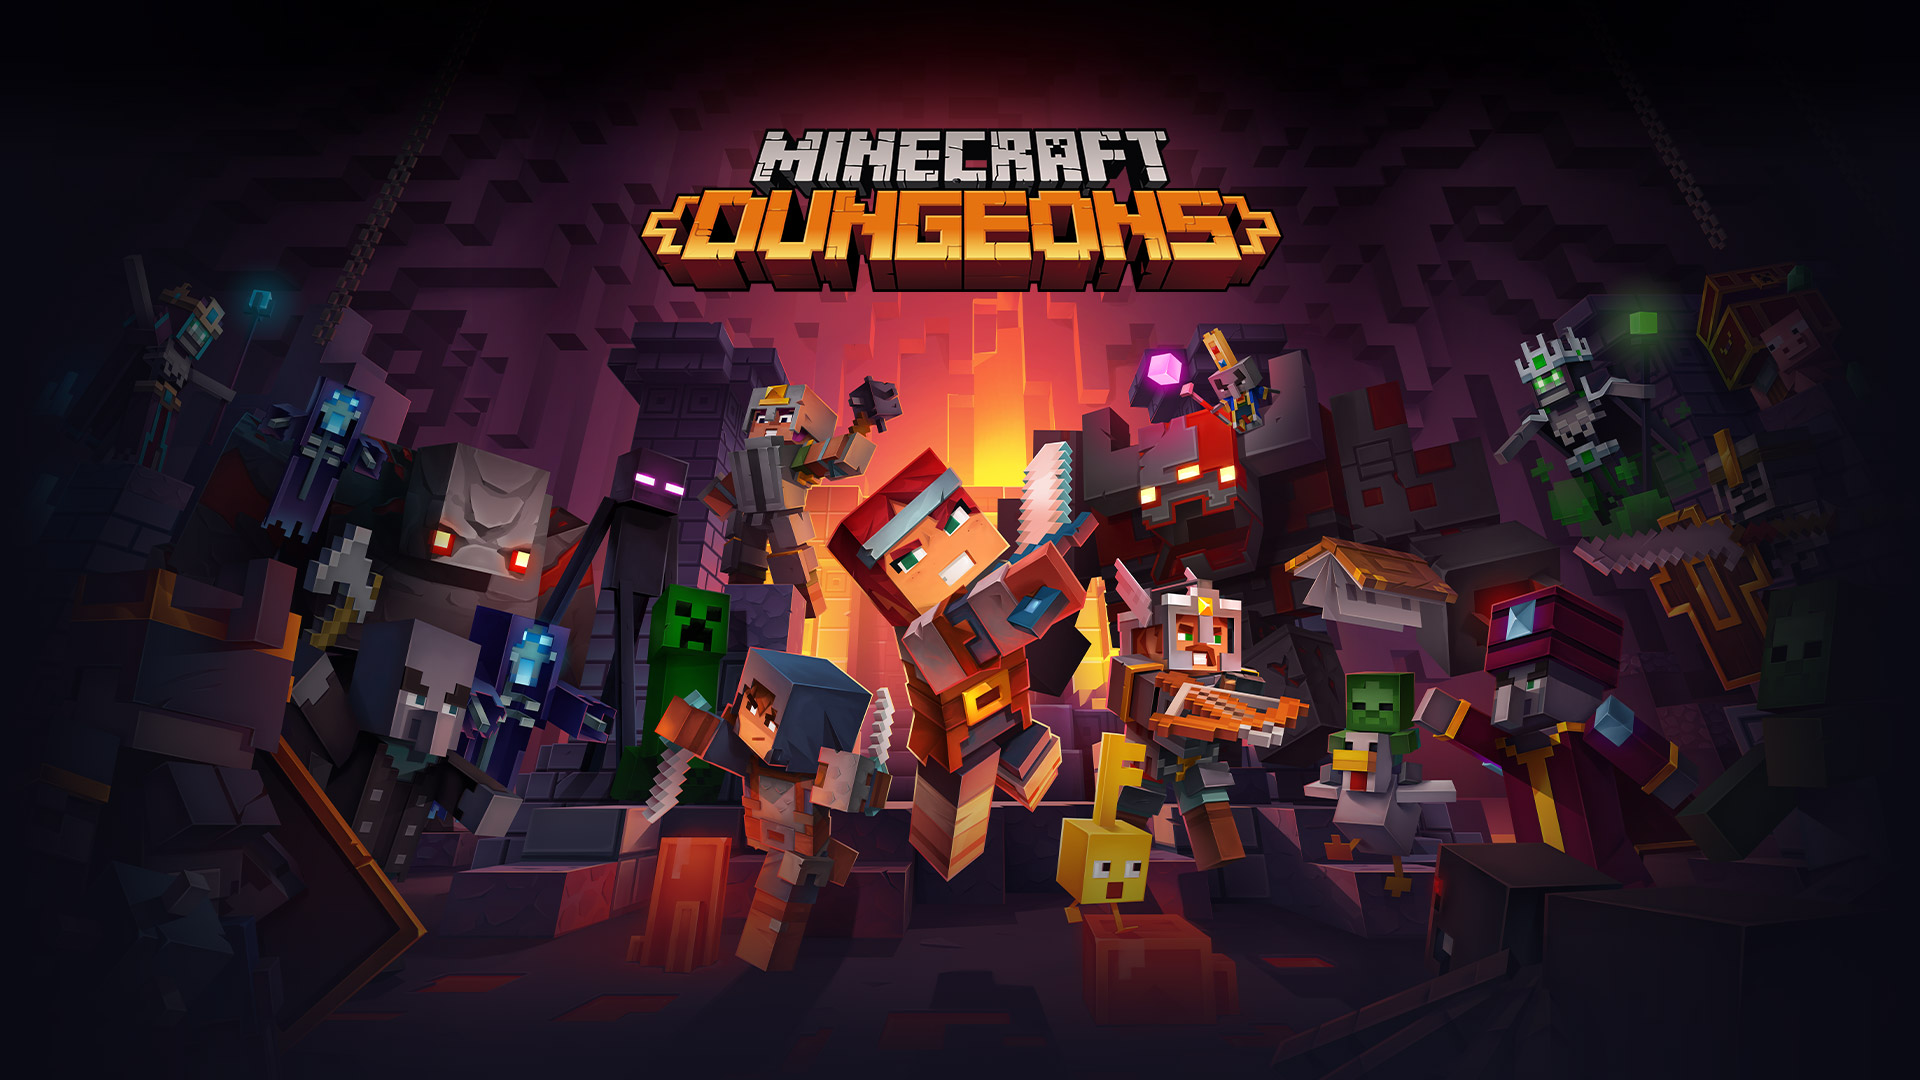 Minecraft Dungeons logo in front of all Minecraft characters fighting in a dungeon